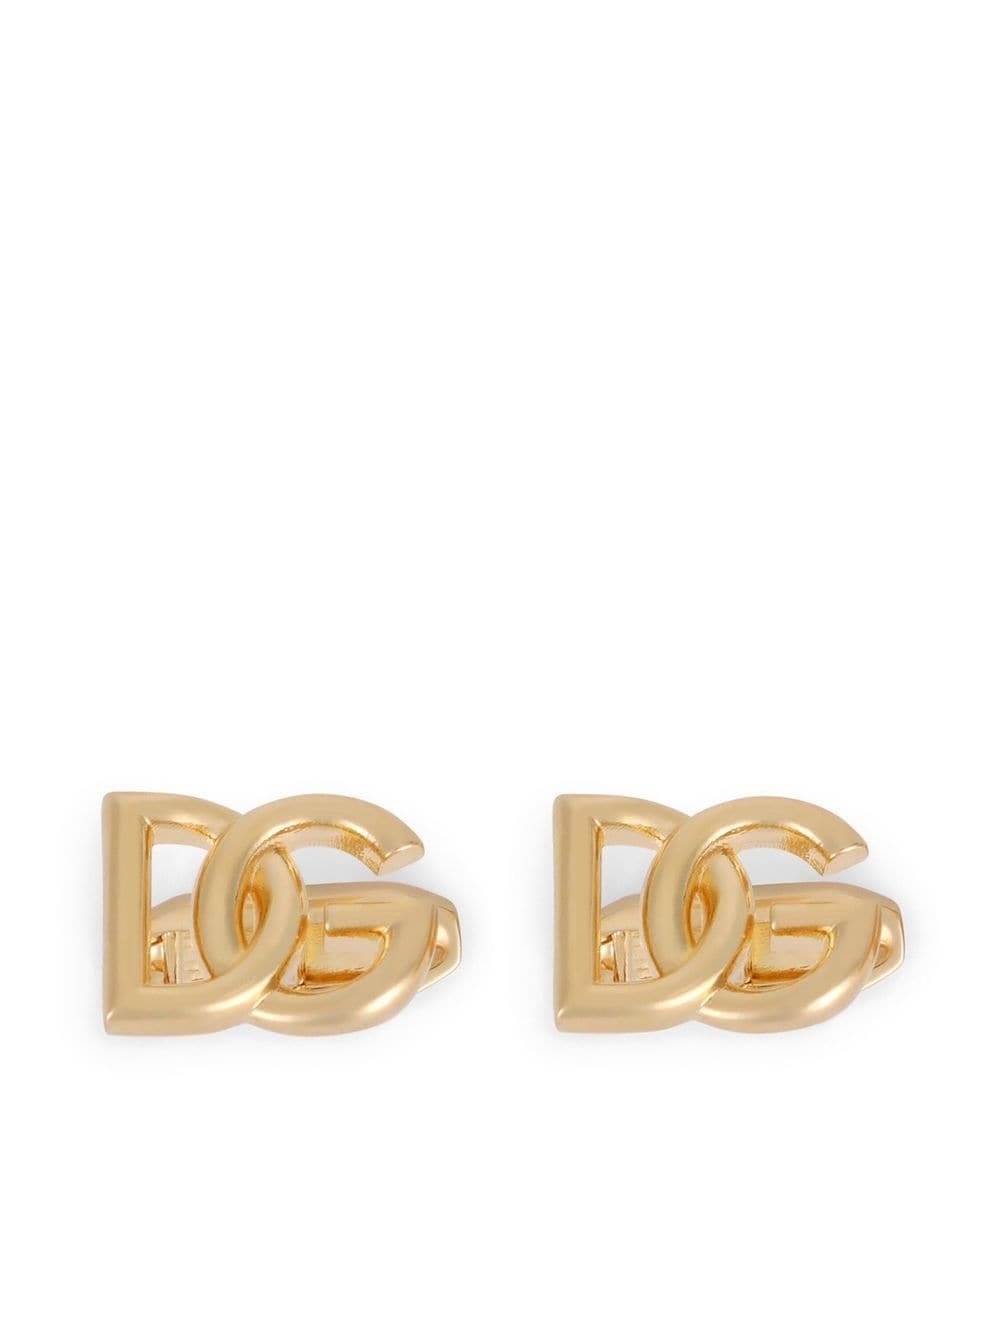 dolce & gabbana CUFFLINKS available on montiboutique.com - 55267